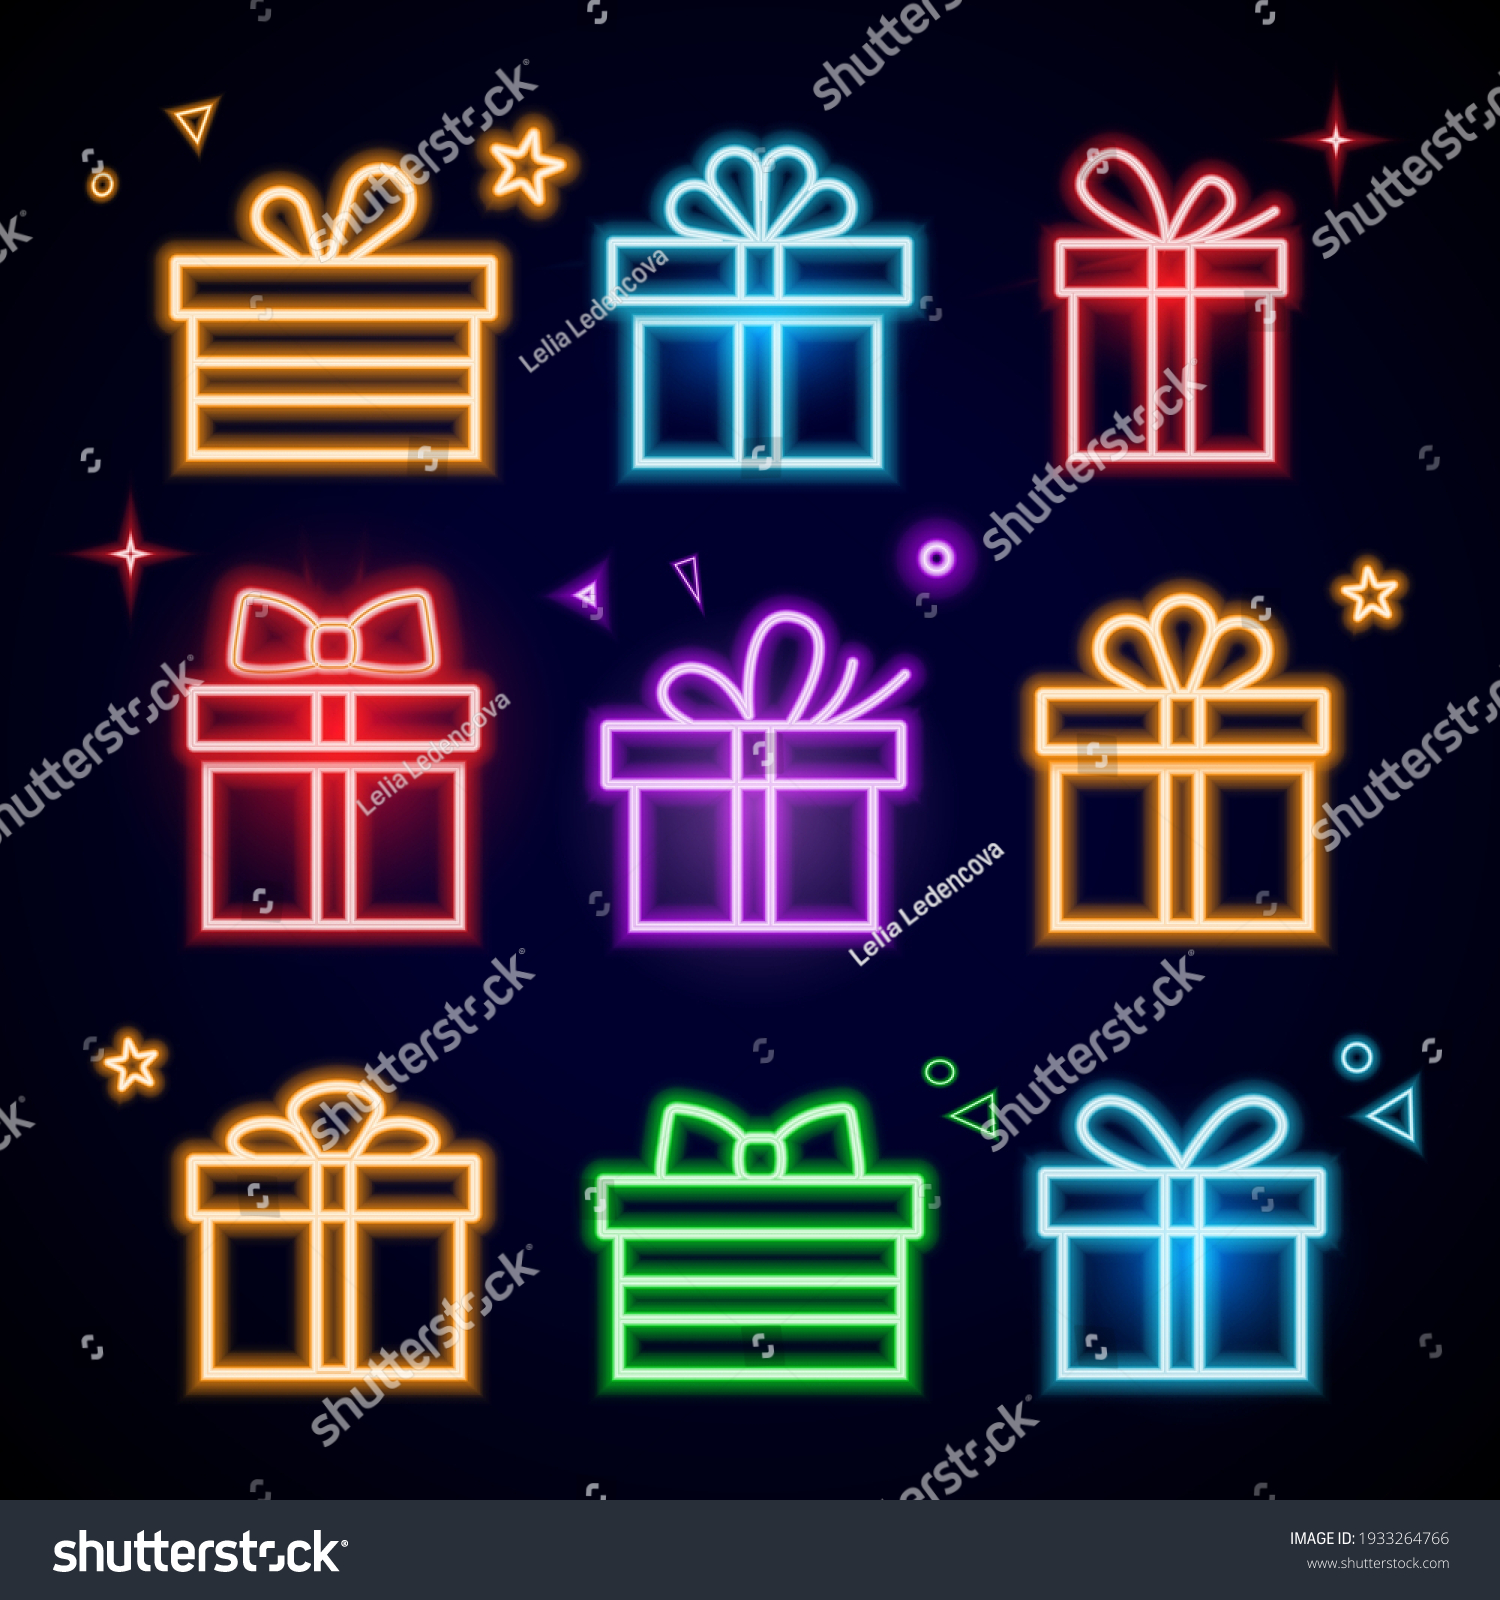 SVG of Gift neon sign. COLORFUL Gift box icons. Night neon sign, night bright advertisement, light banner.
 svg